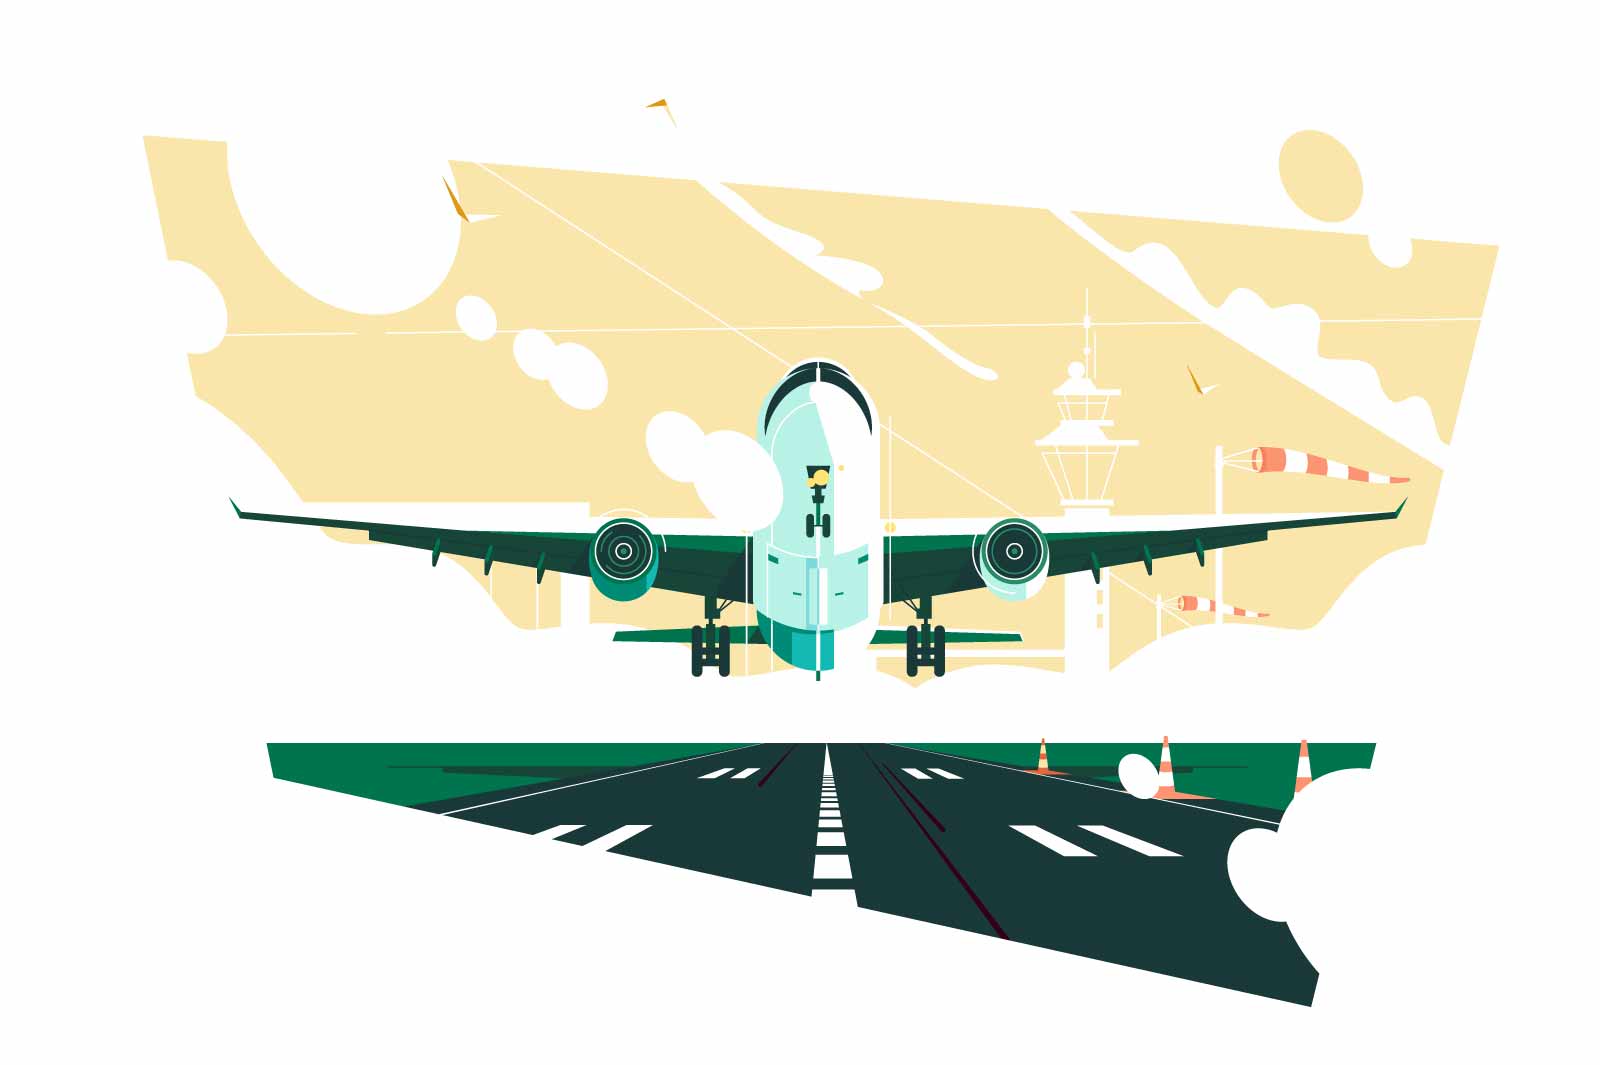 Airplane reaches cruising altitude and take off vector illustration. Plane with pilot fly in air flat style. Trip, aerial transport concept